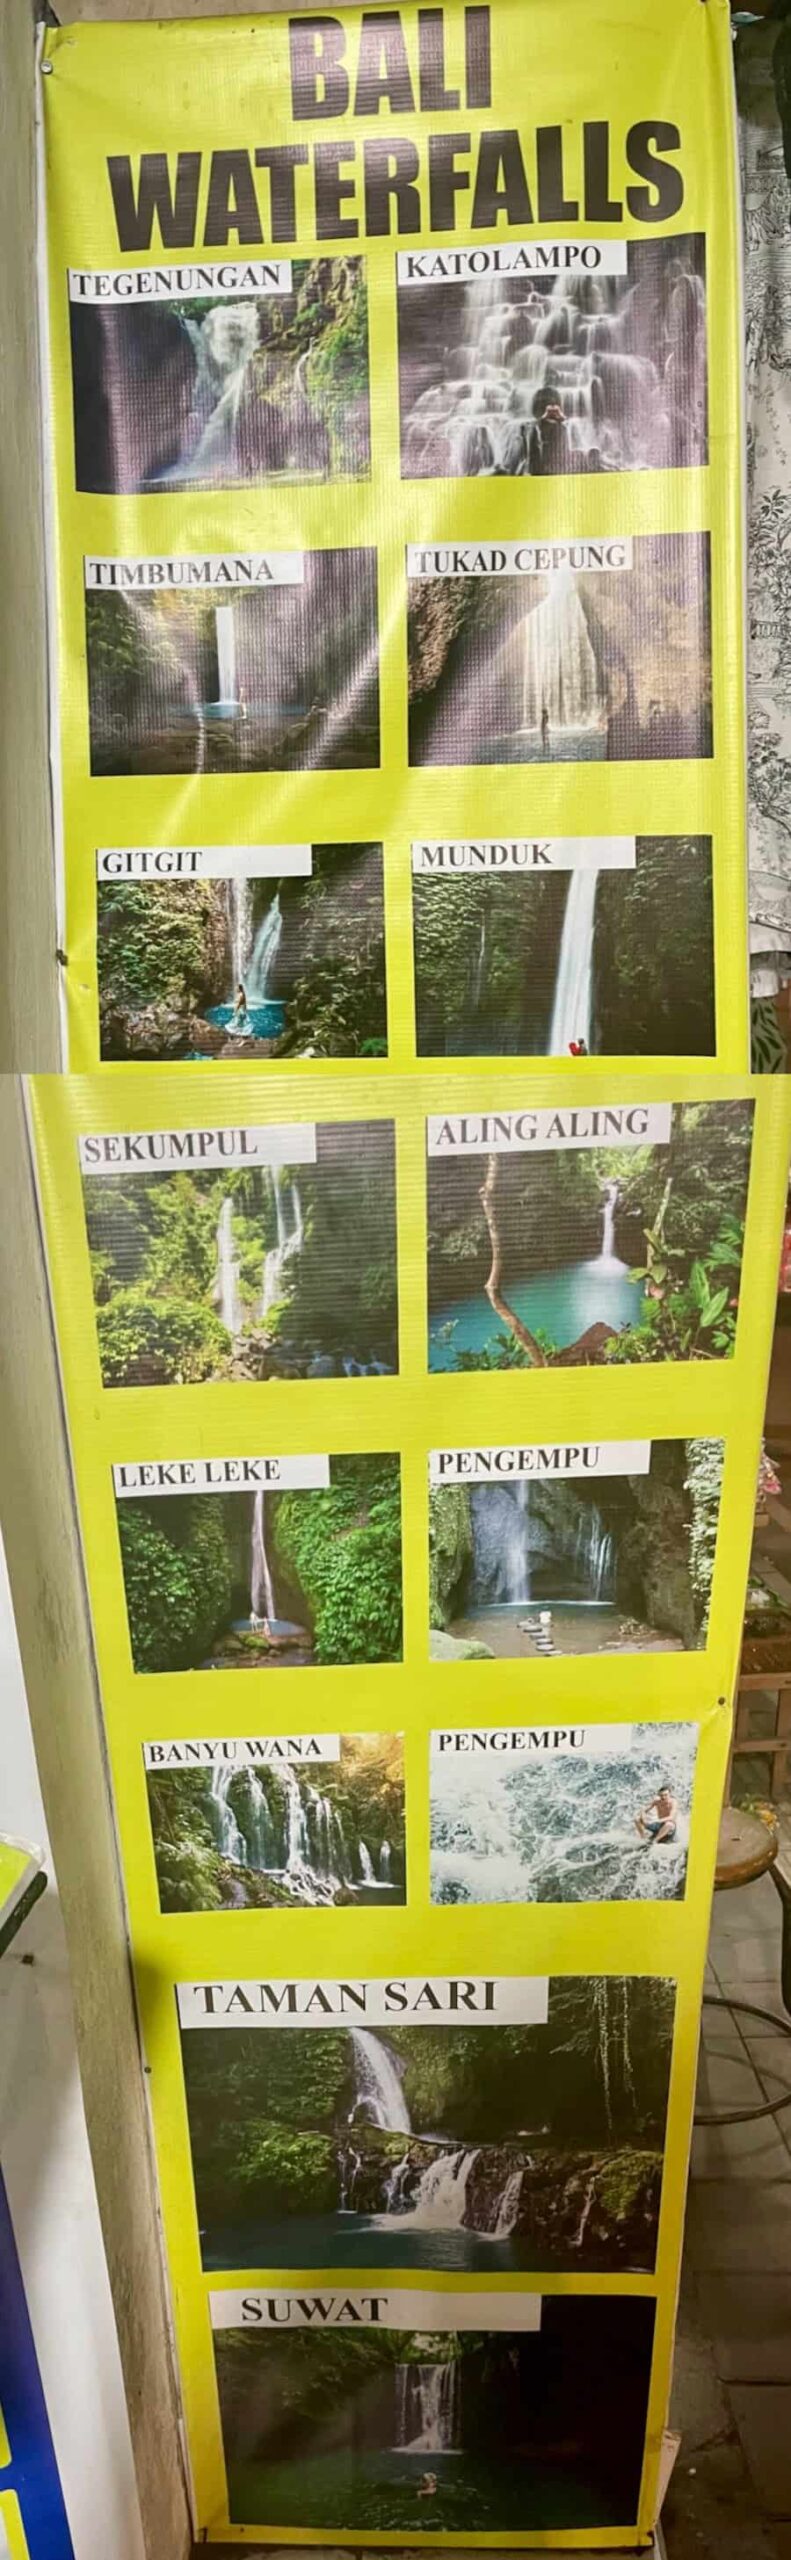 14 Bali Waterfalls on Poster at Tourist Counter in Ubud